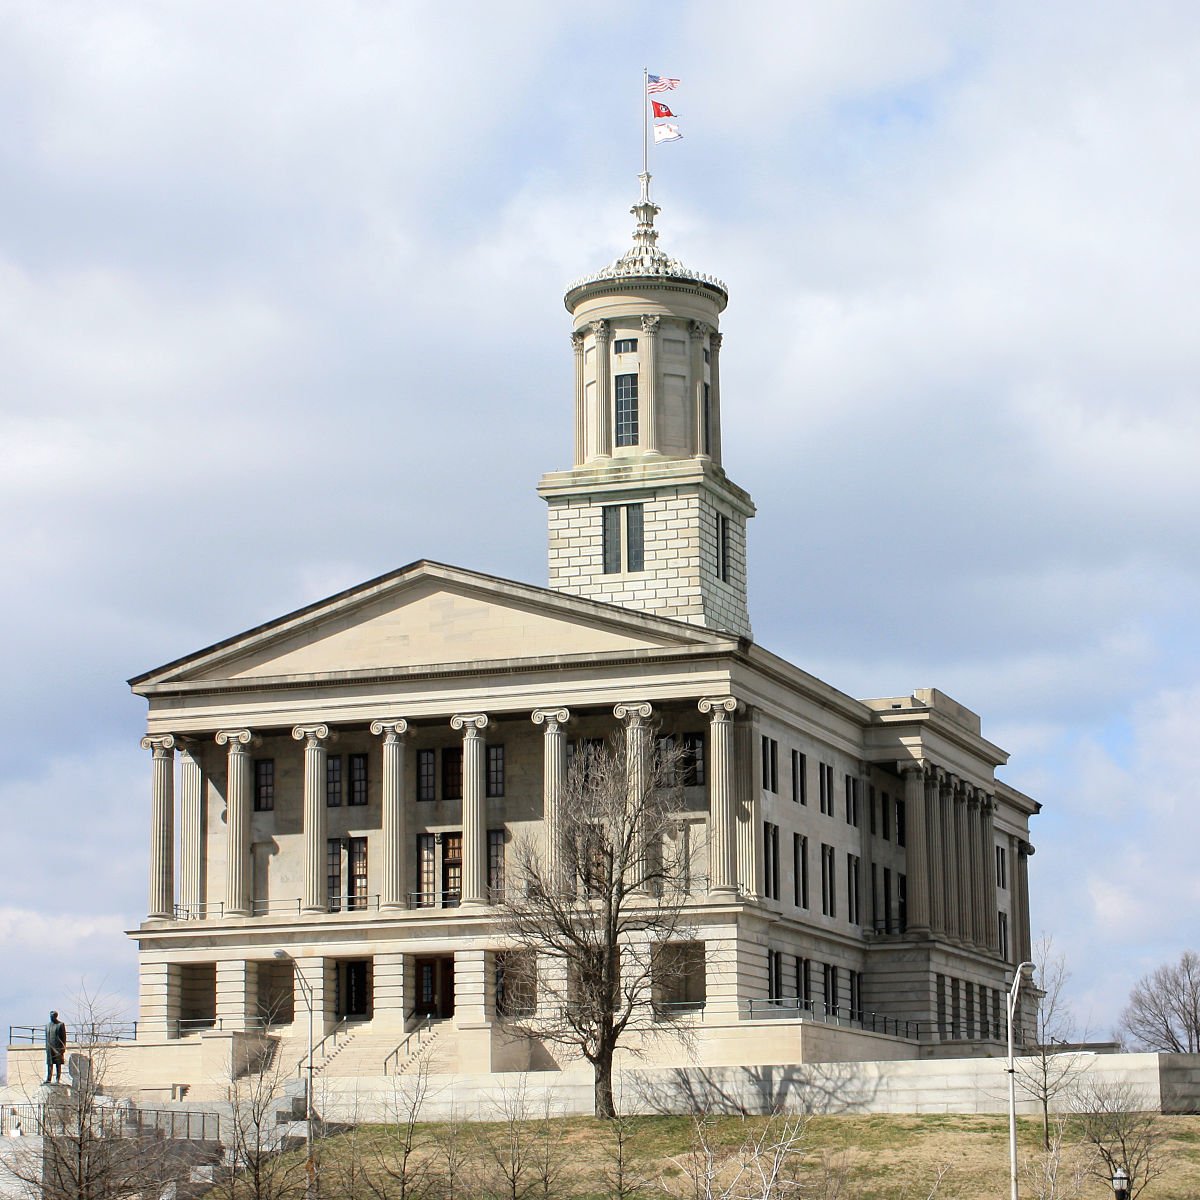 Tennessee Lawmakers Aim to Obstruct Retirement Funds from Cryptos